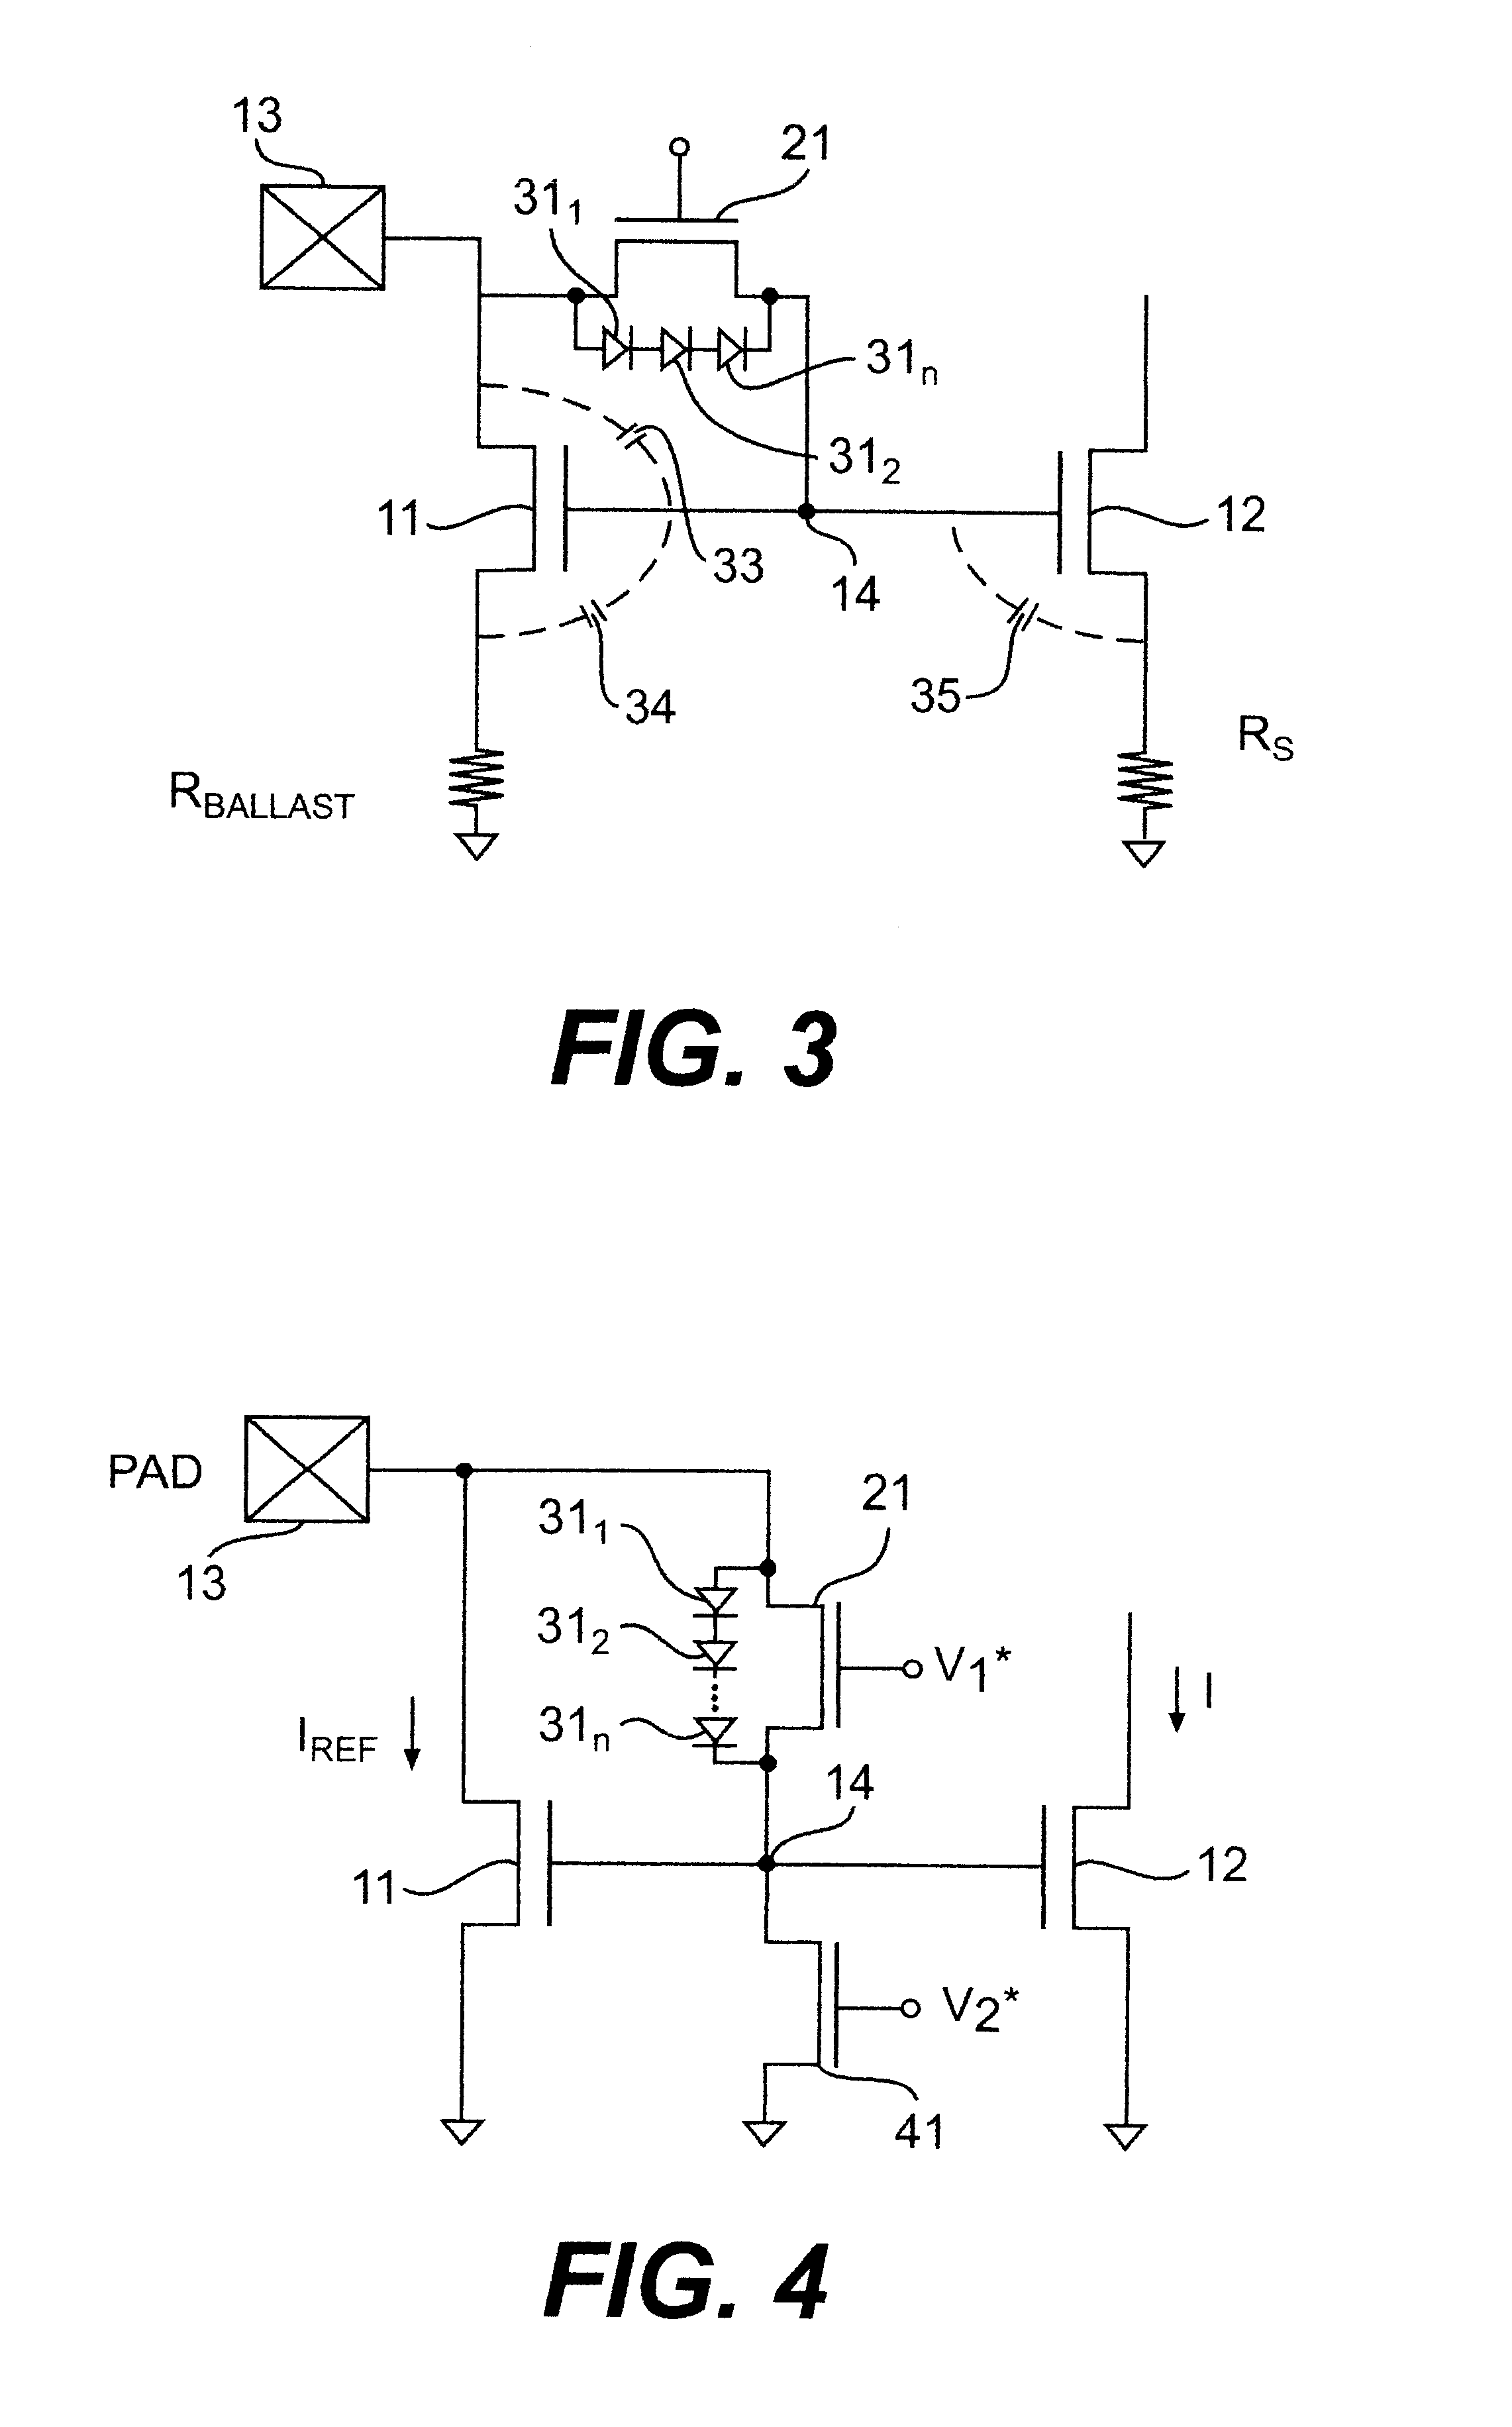 Modified current mirror circuit for BiCMOS application